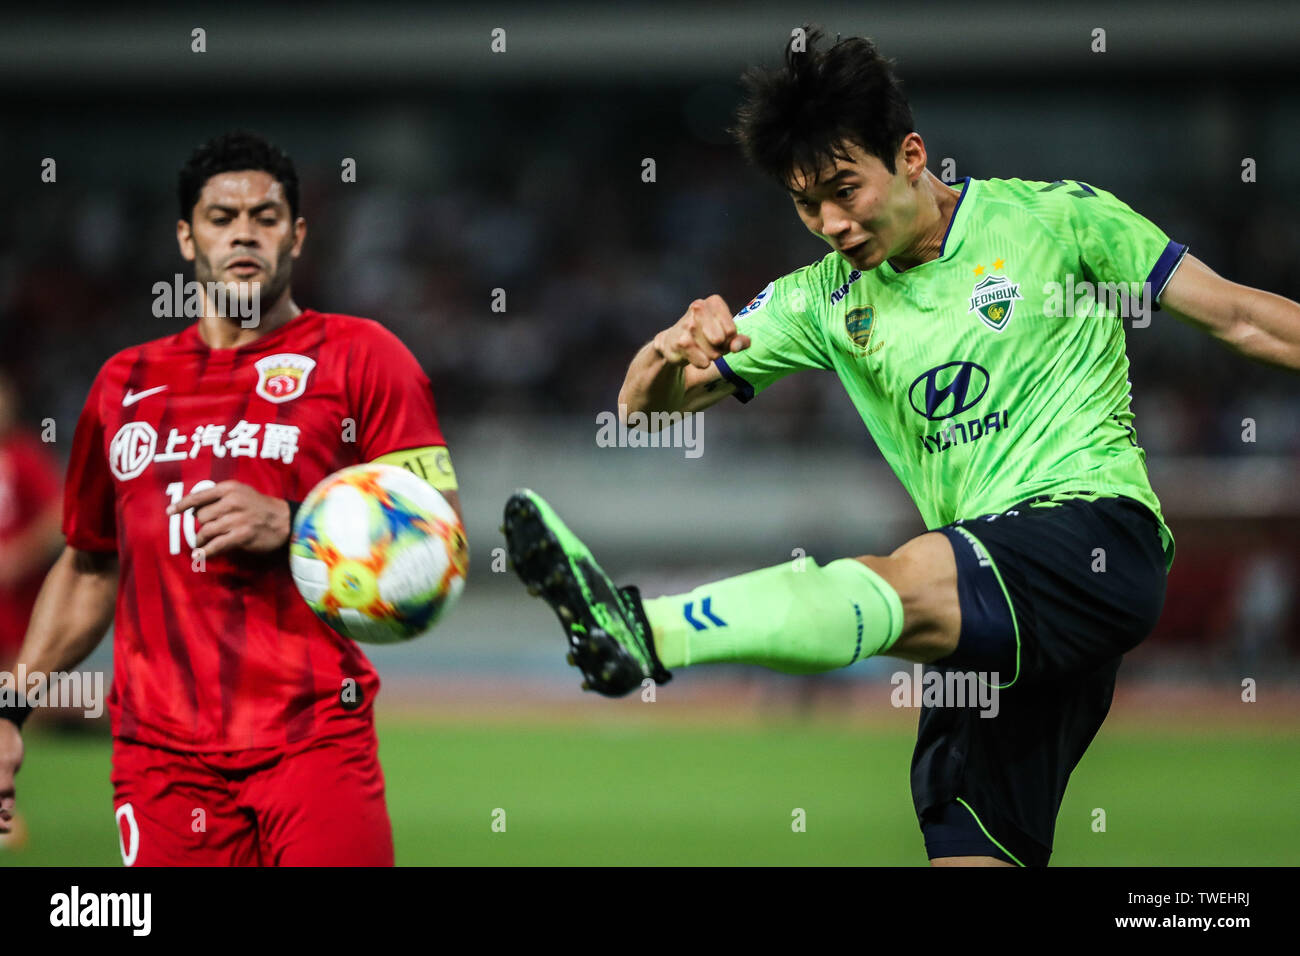 Kim Jin-su, right, of South Korea's Jeonbuk Hyundai Motors FC passes the ball against Brazilian football player Givanildo Vieira de Sousa, known as Hulk, of Shanghai SIPG in the eighth-final match during the 2019 AFC Champions League in Shanghai, China, 19 June 2019. Two-time champions Jeonbuk Hyundai Motors will take an advantage into the second leg of their 2019 AFC Champions League (ACL) Round of 16 game with Shanghai SIPG FC next week after netting an away goal in their 1-1 draw in Shanghai on Wednesday. Stock Photo